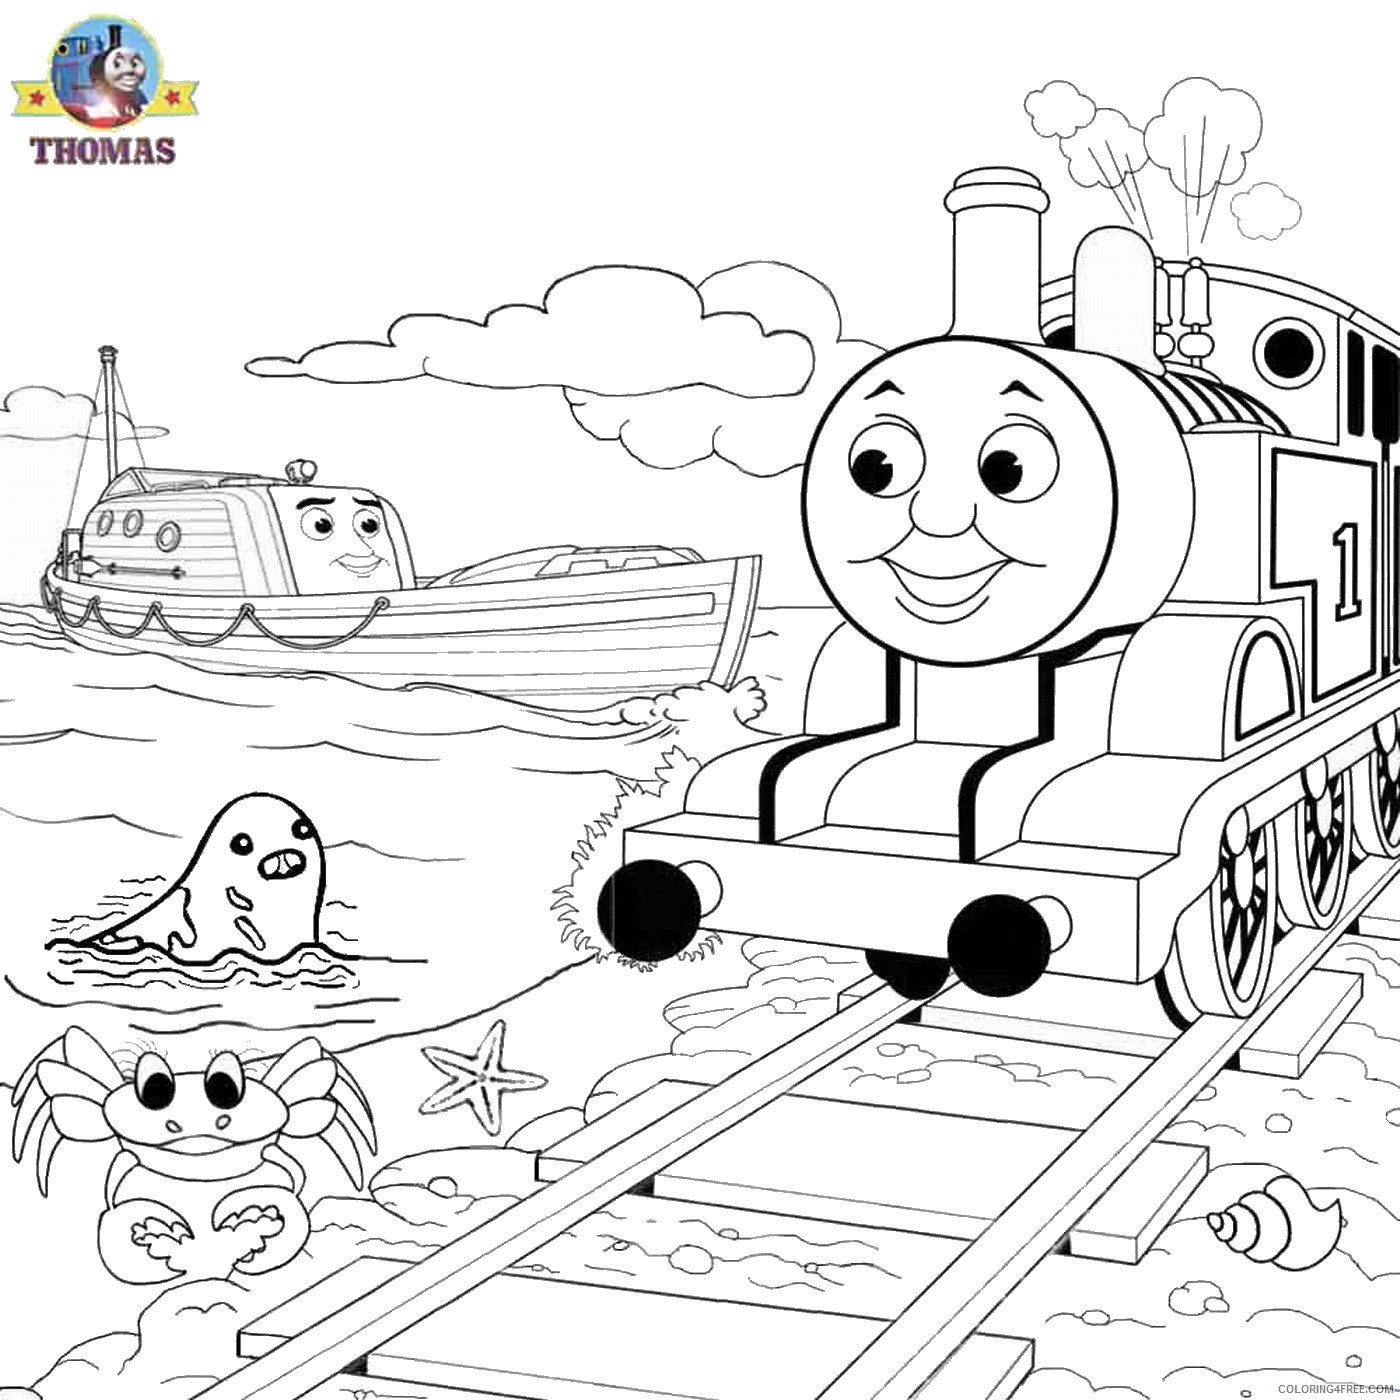 Thomas and Friends Coloring Pages Cartoons thomas_tank_engine_cl30 Printable 2020 6527 Coloring4free